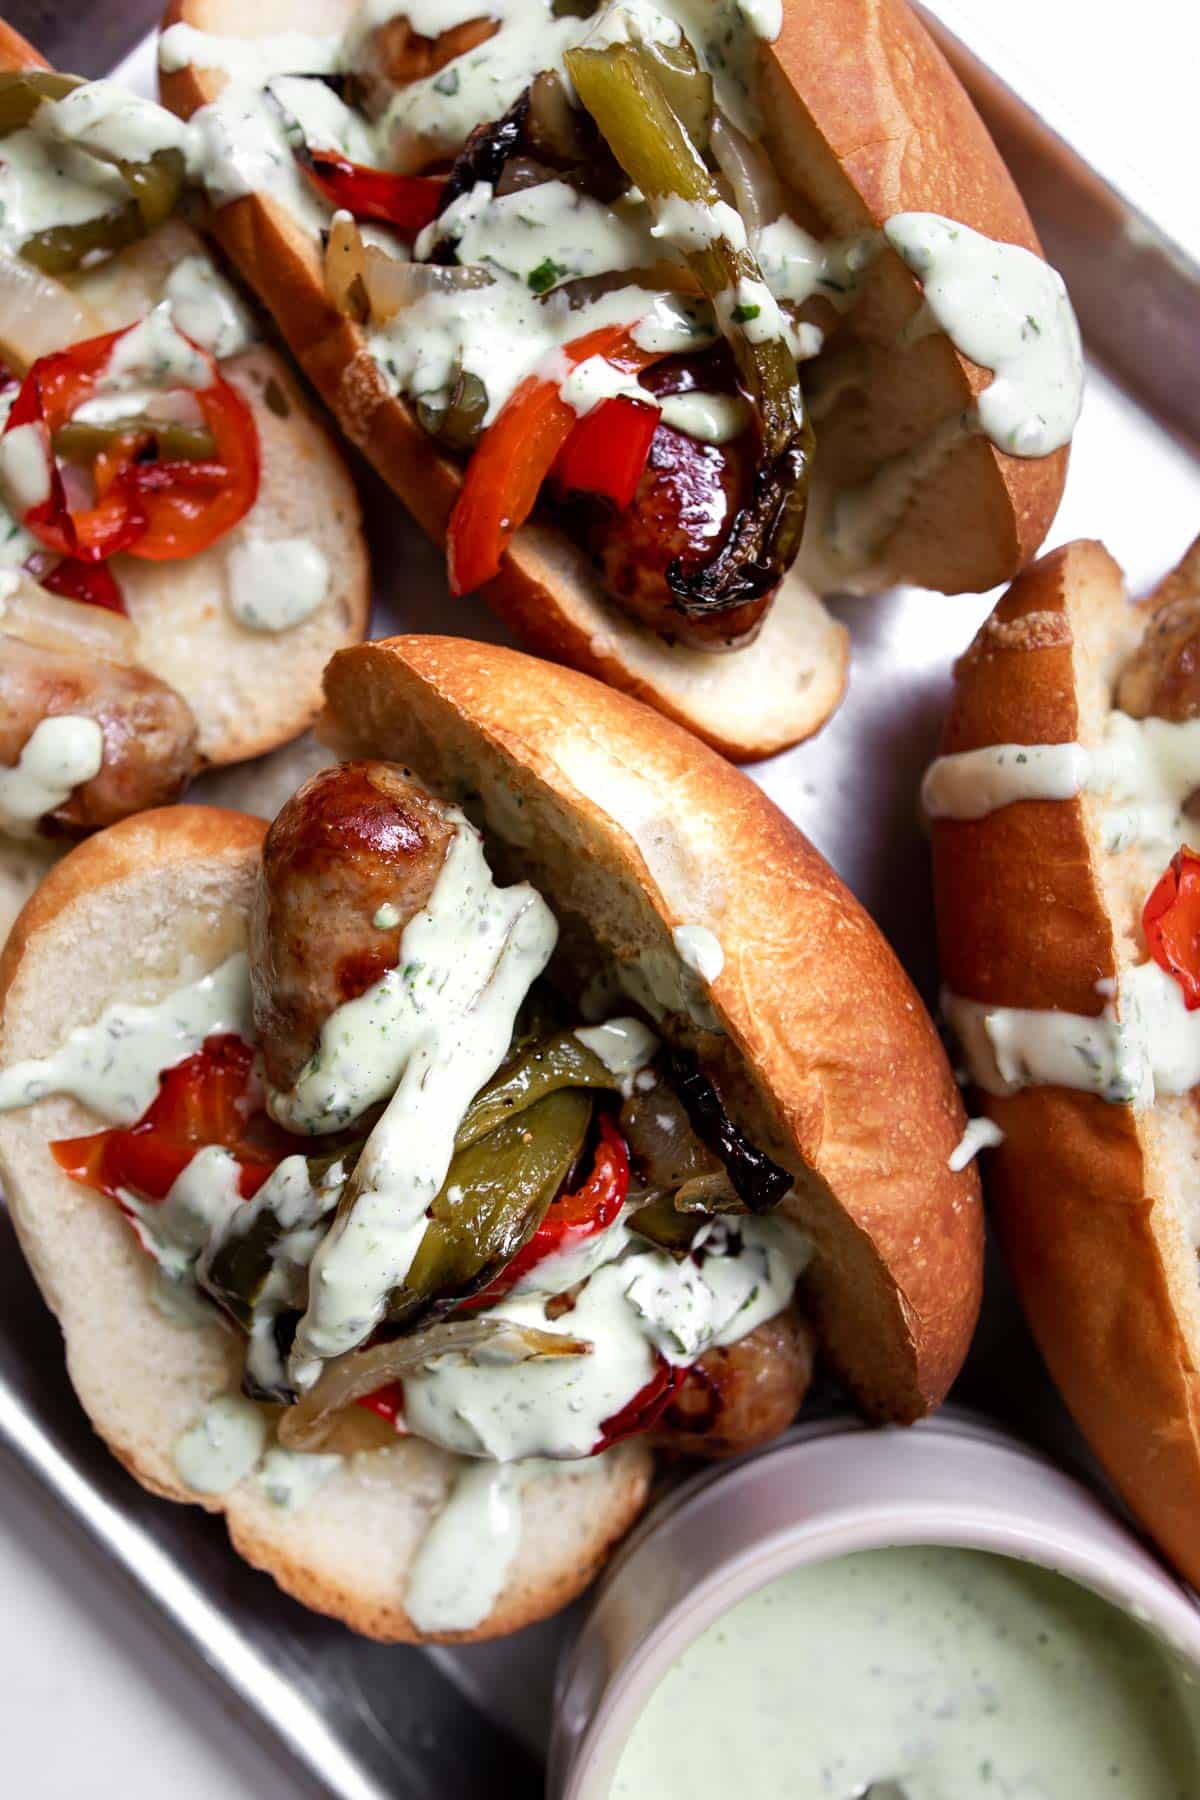 Close up of Italian sausage on a bun with roasted peppers, onions and basil mayonnaise sauce along with ramekin of basil mayo.